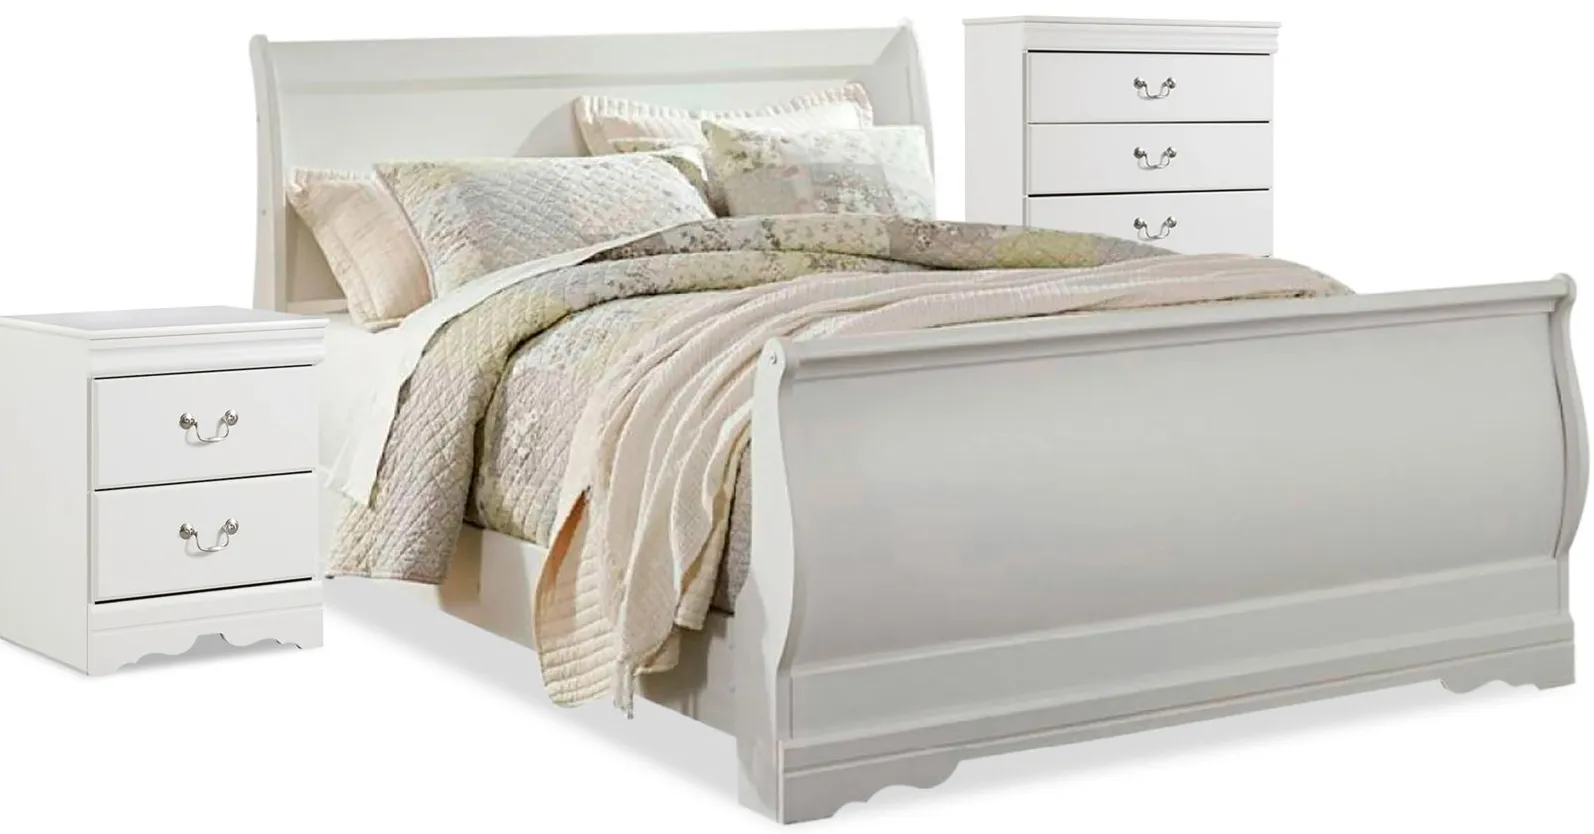 Anarasia 3-pc. Bedroom Set in White by Ashley Furniture